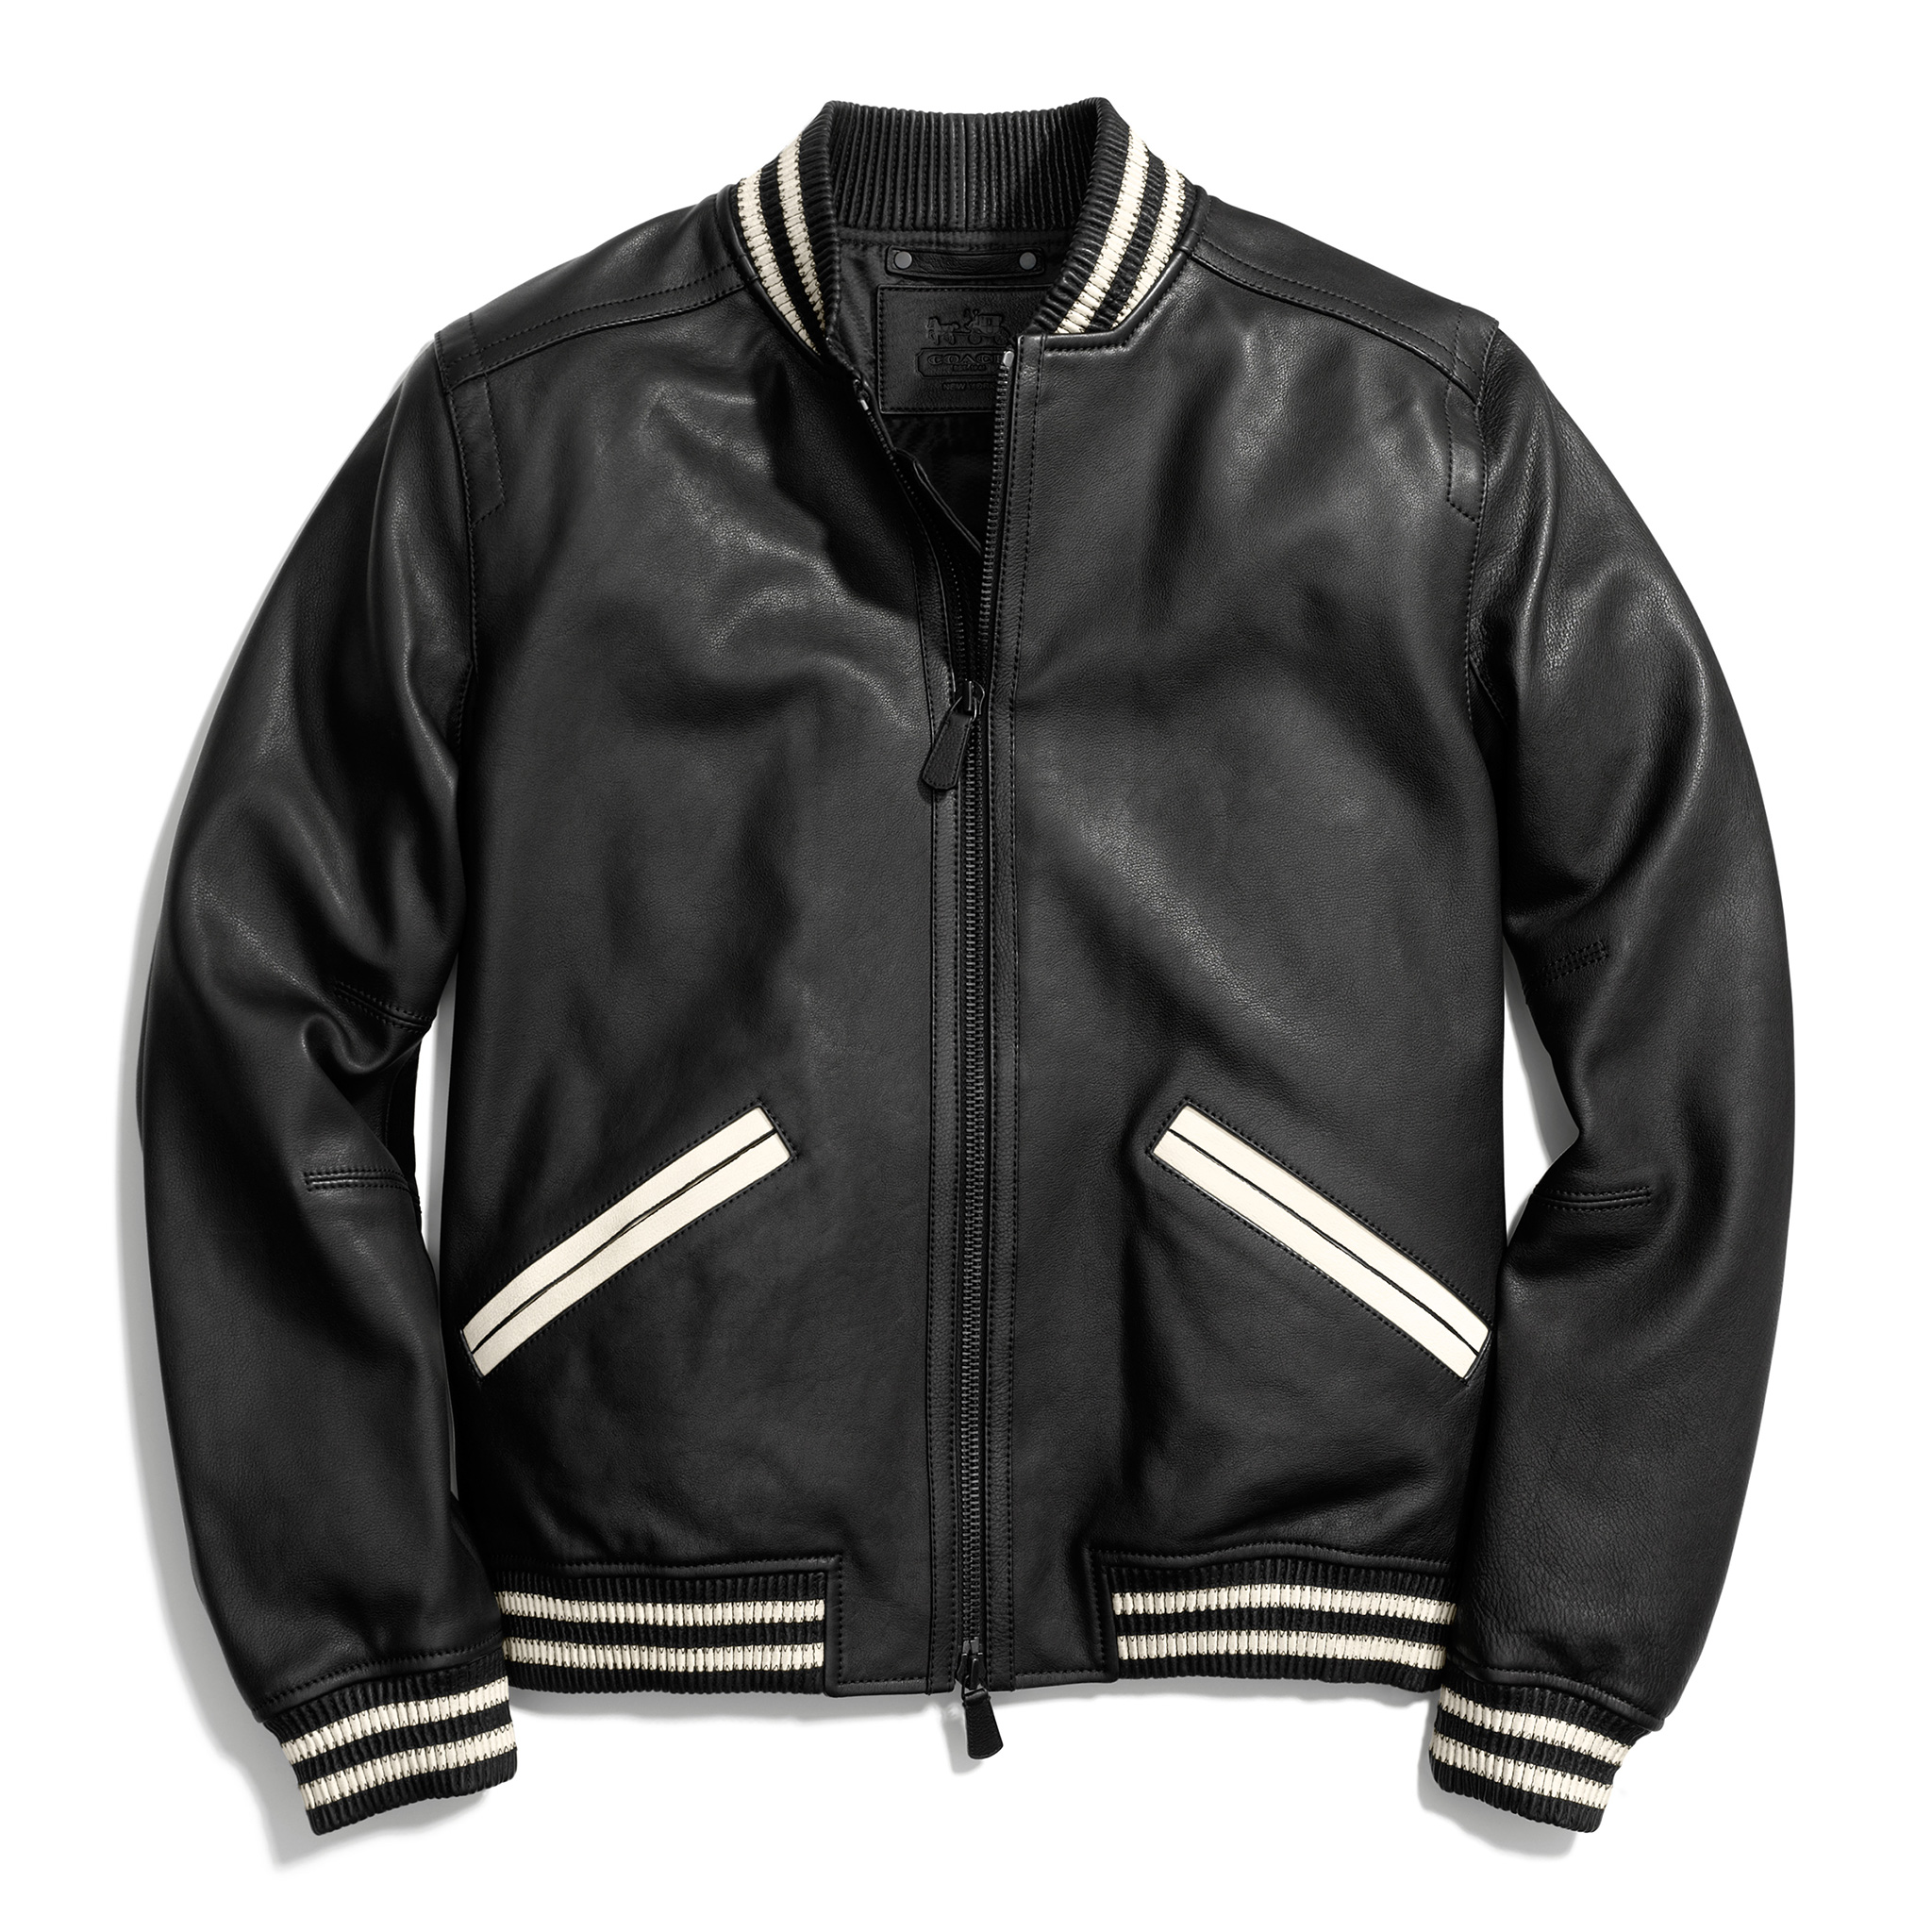 COACH LEATHER BASEBALL JACKET - ONLY THE TOPS FOR POPS - ESPN